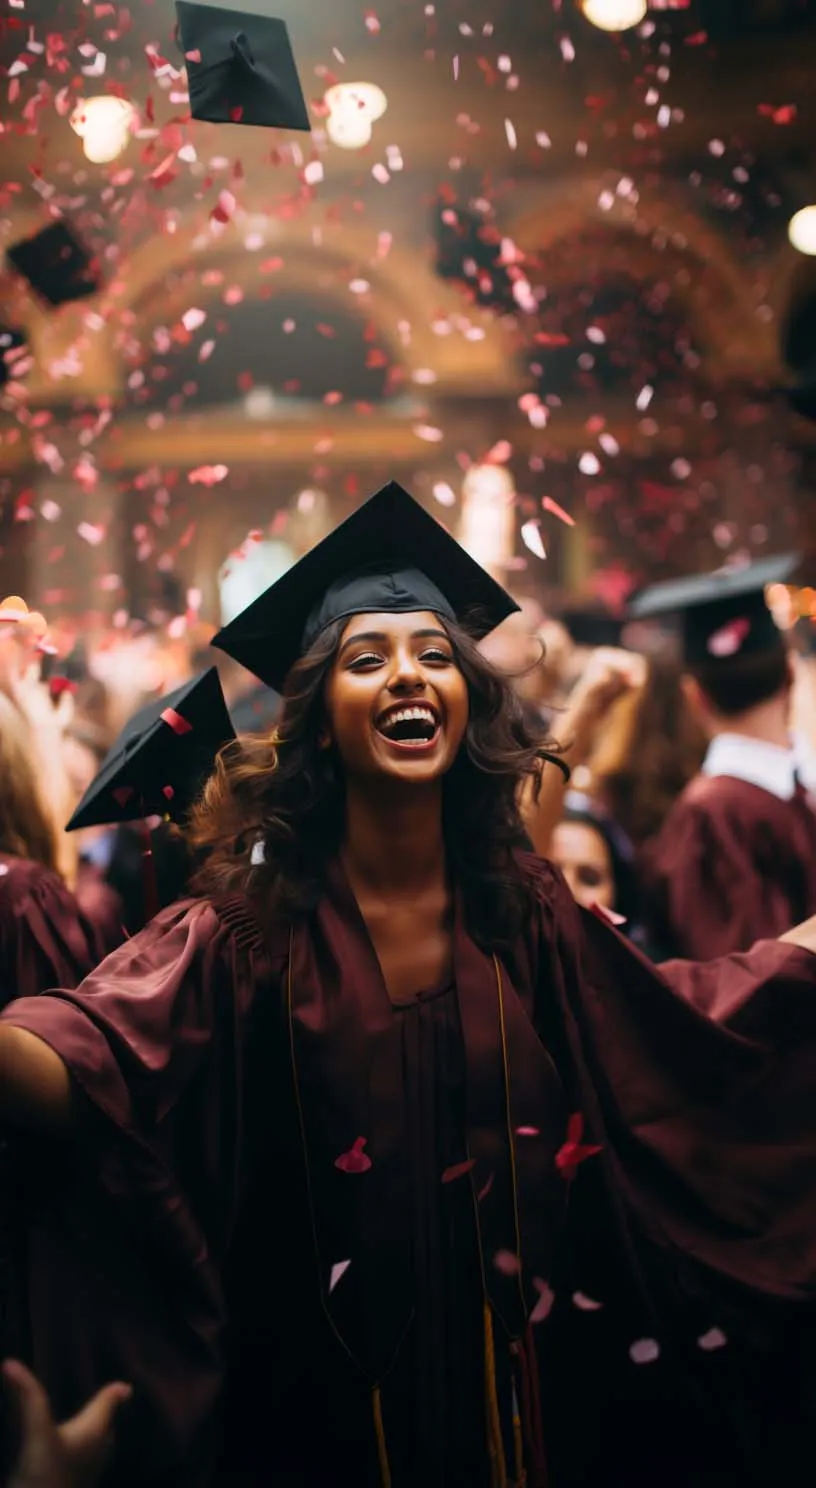 a woman in graduation gown and cap throwing confetti